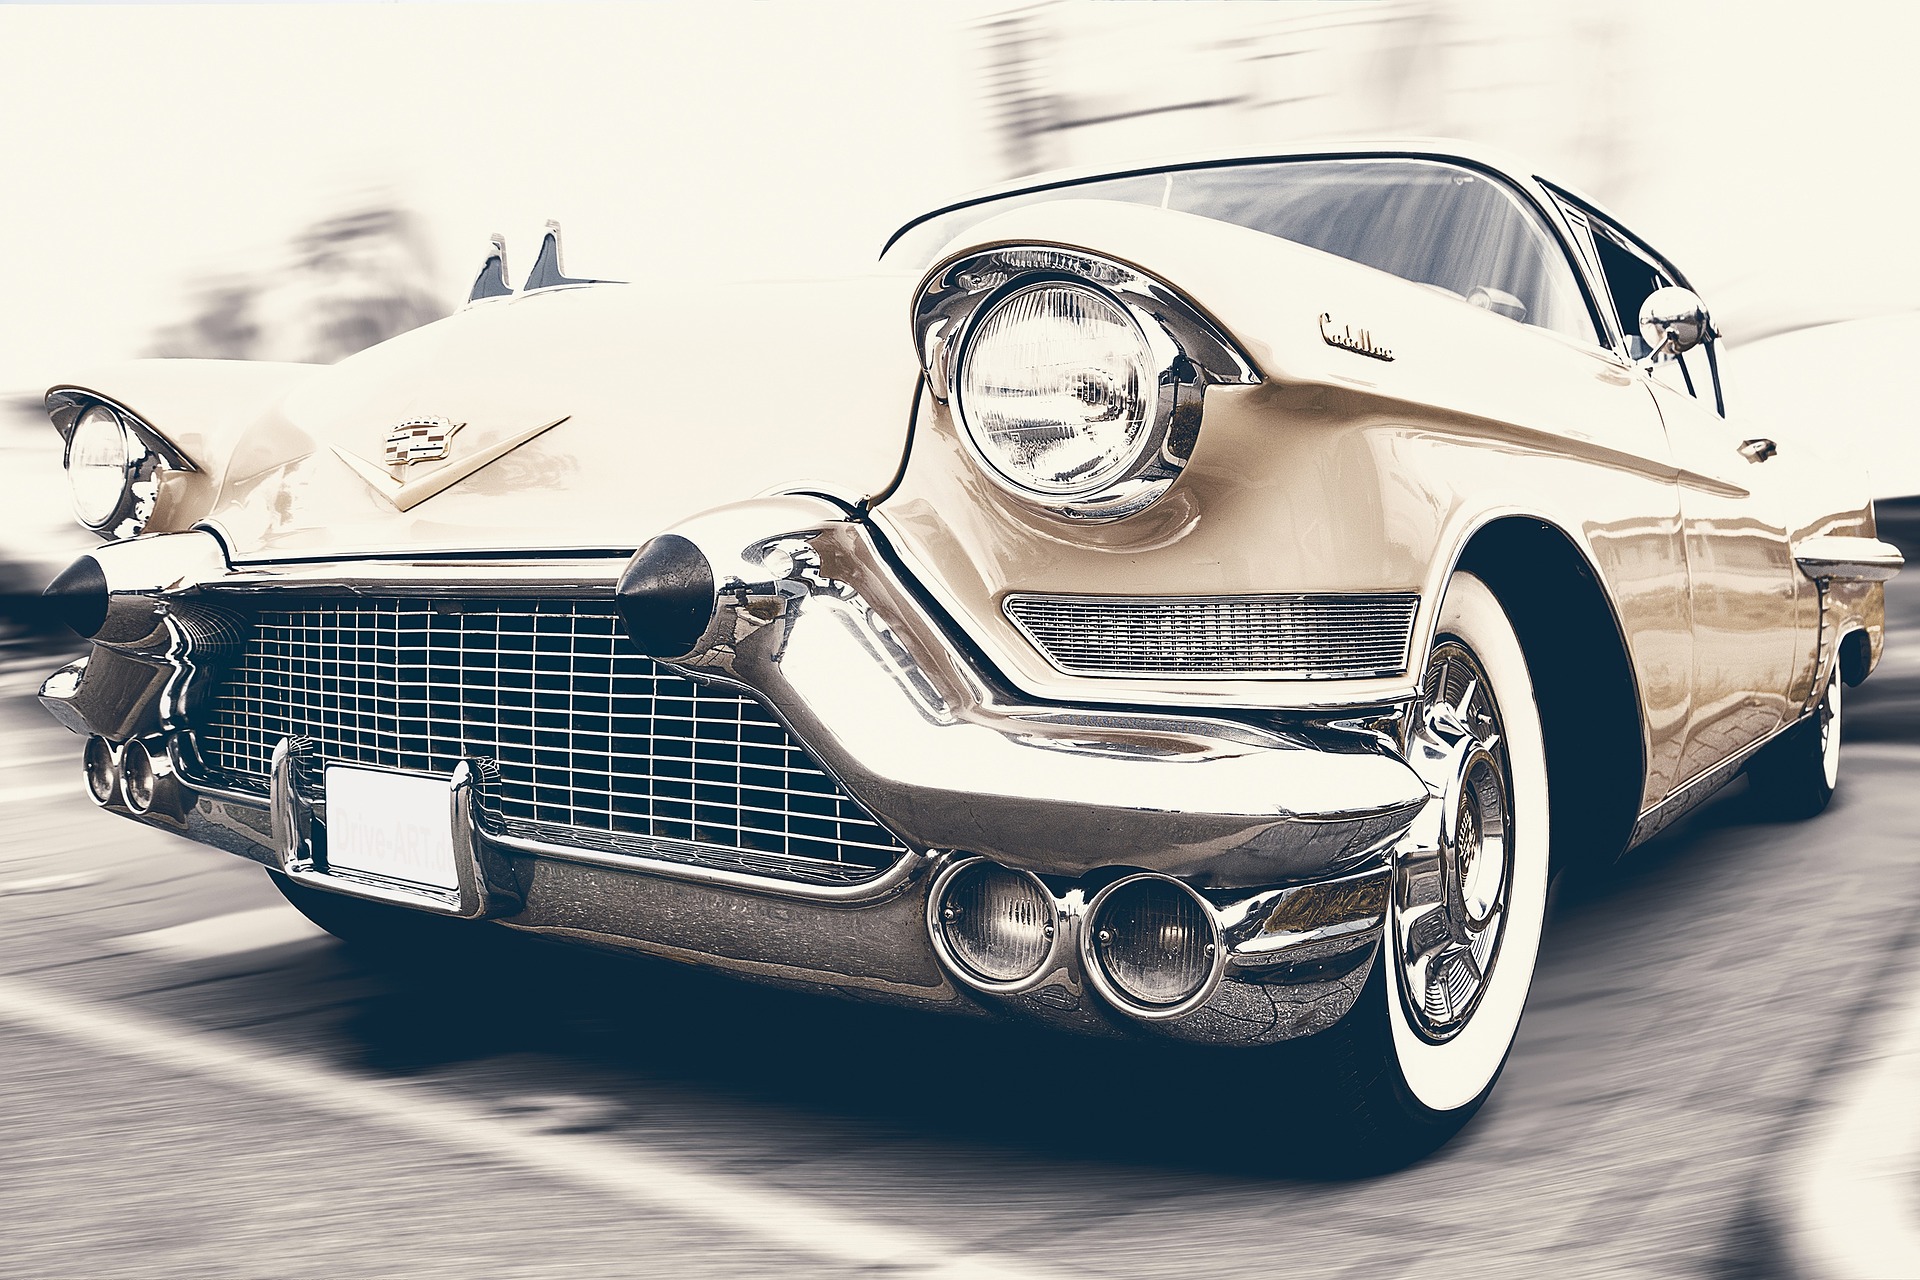 Where to sell classic cars – All you need to know